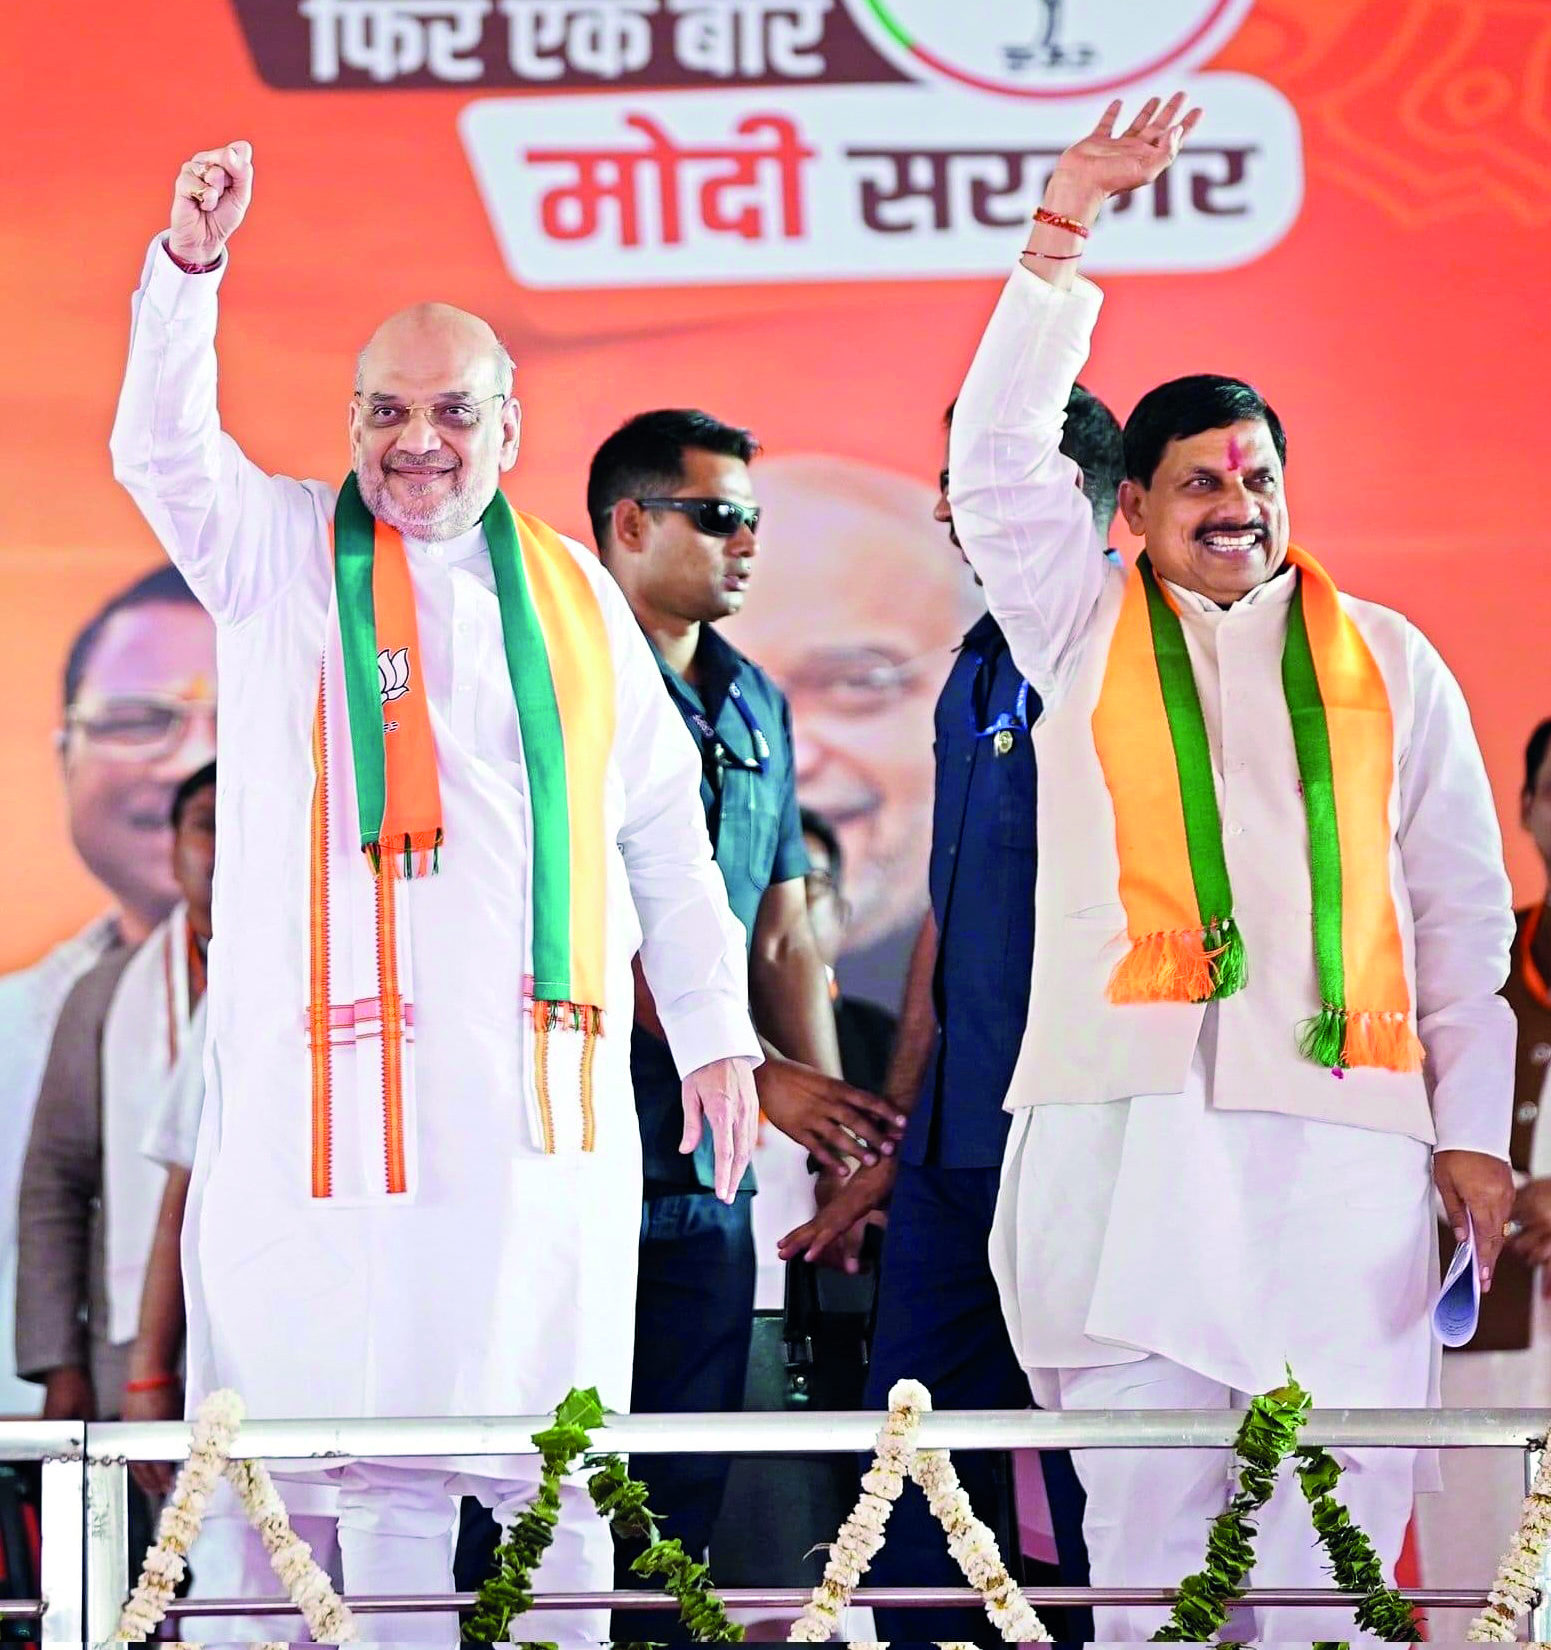 LS elections: INDIA bloc is a concourse of corrupts, says Amit Shah in Madhya Pradesh